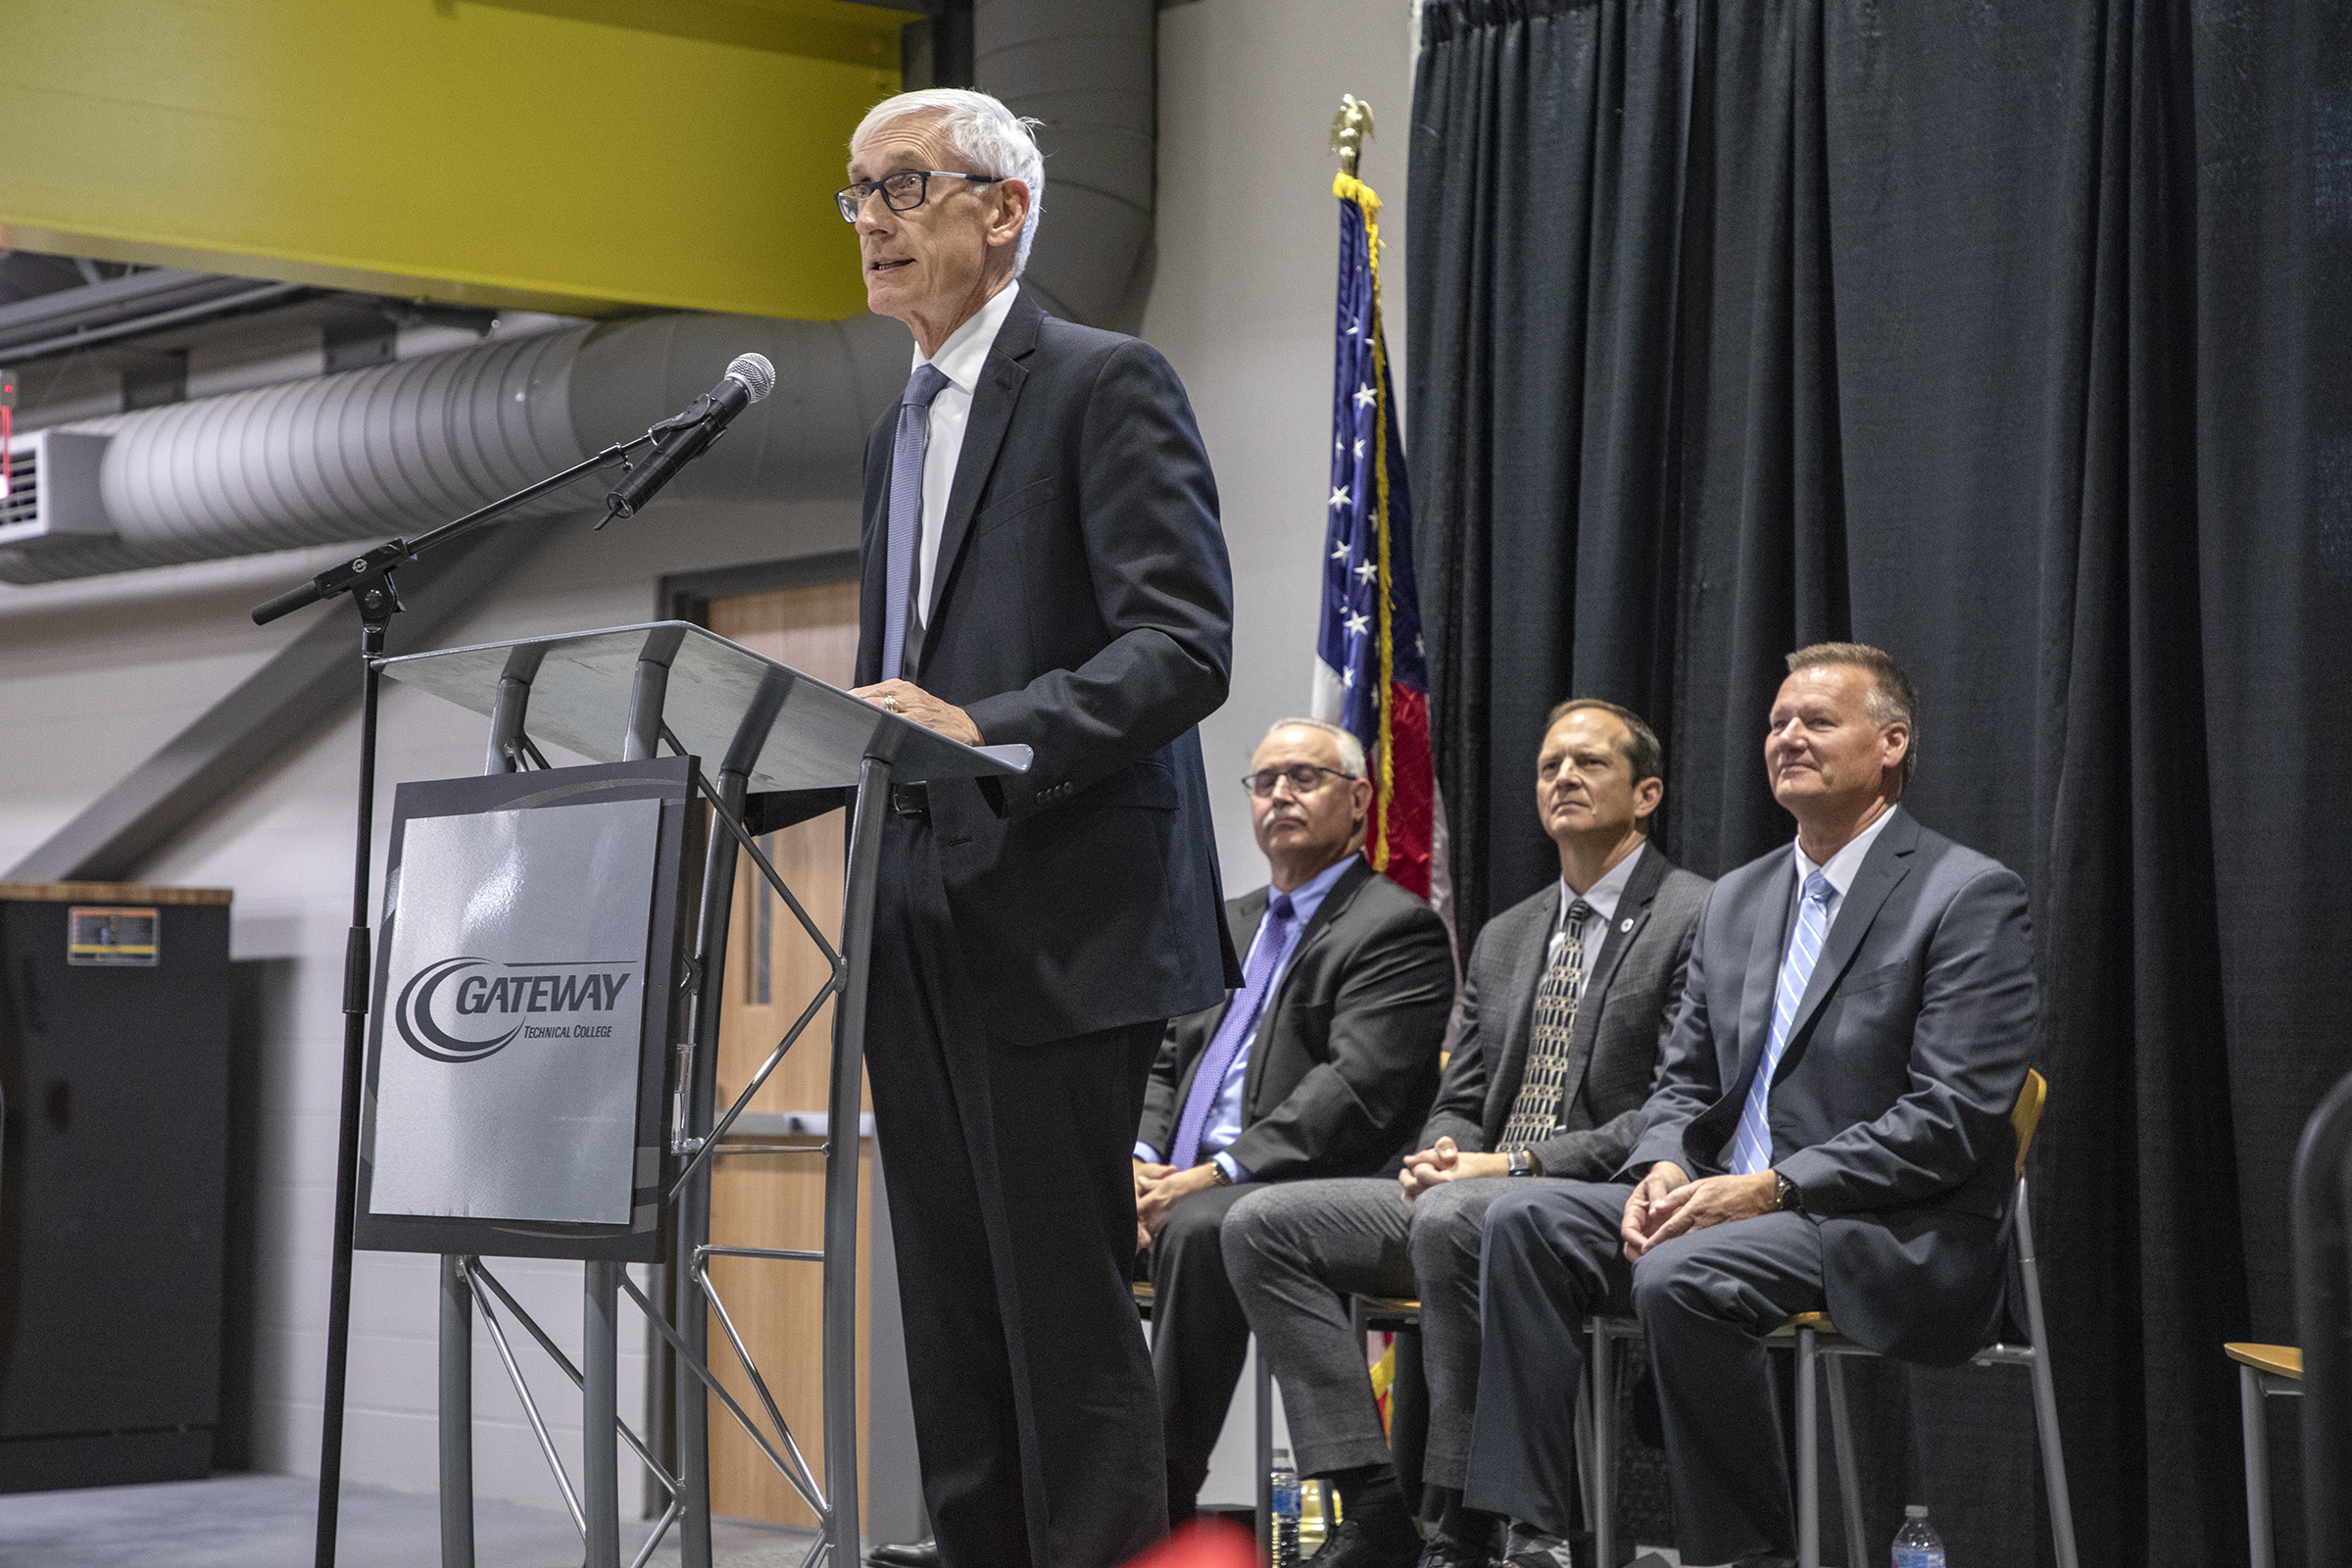 Wisconsin Governor Tony Evers speaks at the opening ceremony for the remodeled and expanded Gateway Technical College SC Johnson iMET Center in Sturtevant Wis., on Oct. 22, 2019. Evers said the center will help drive advanced manufacturing training in the state as well as nationally.